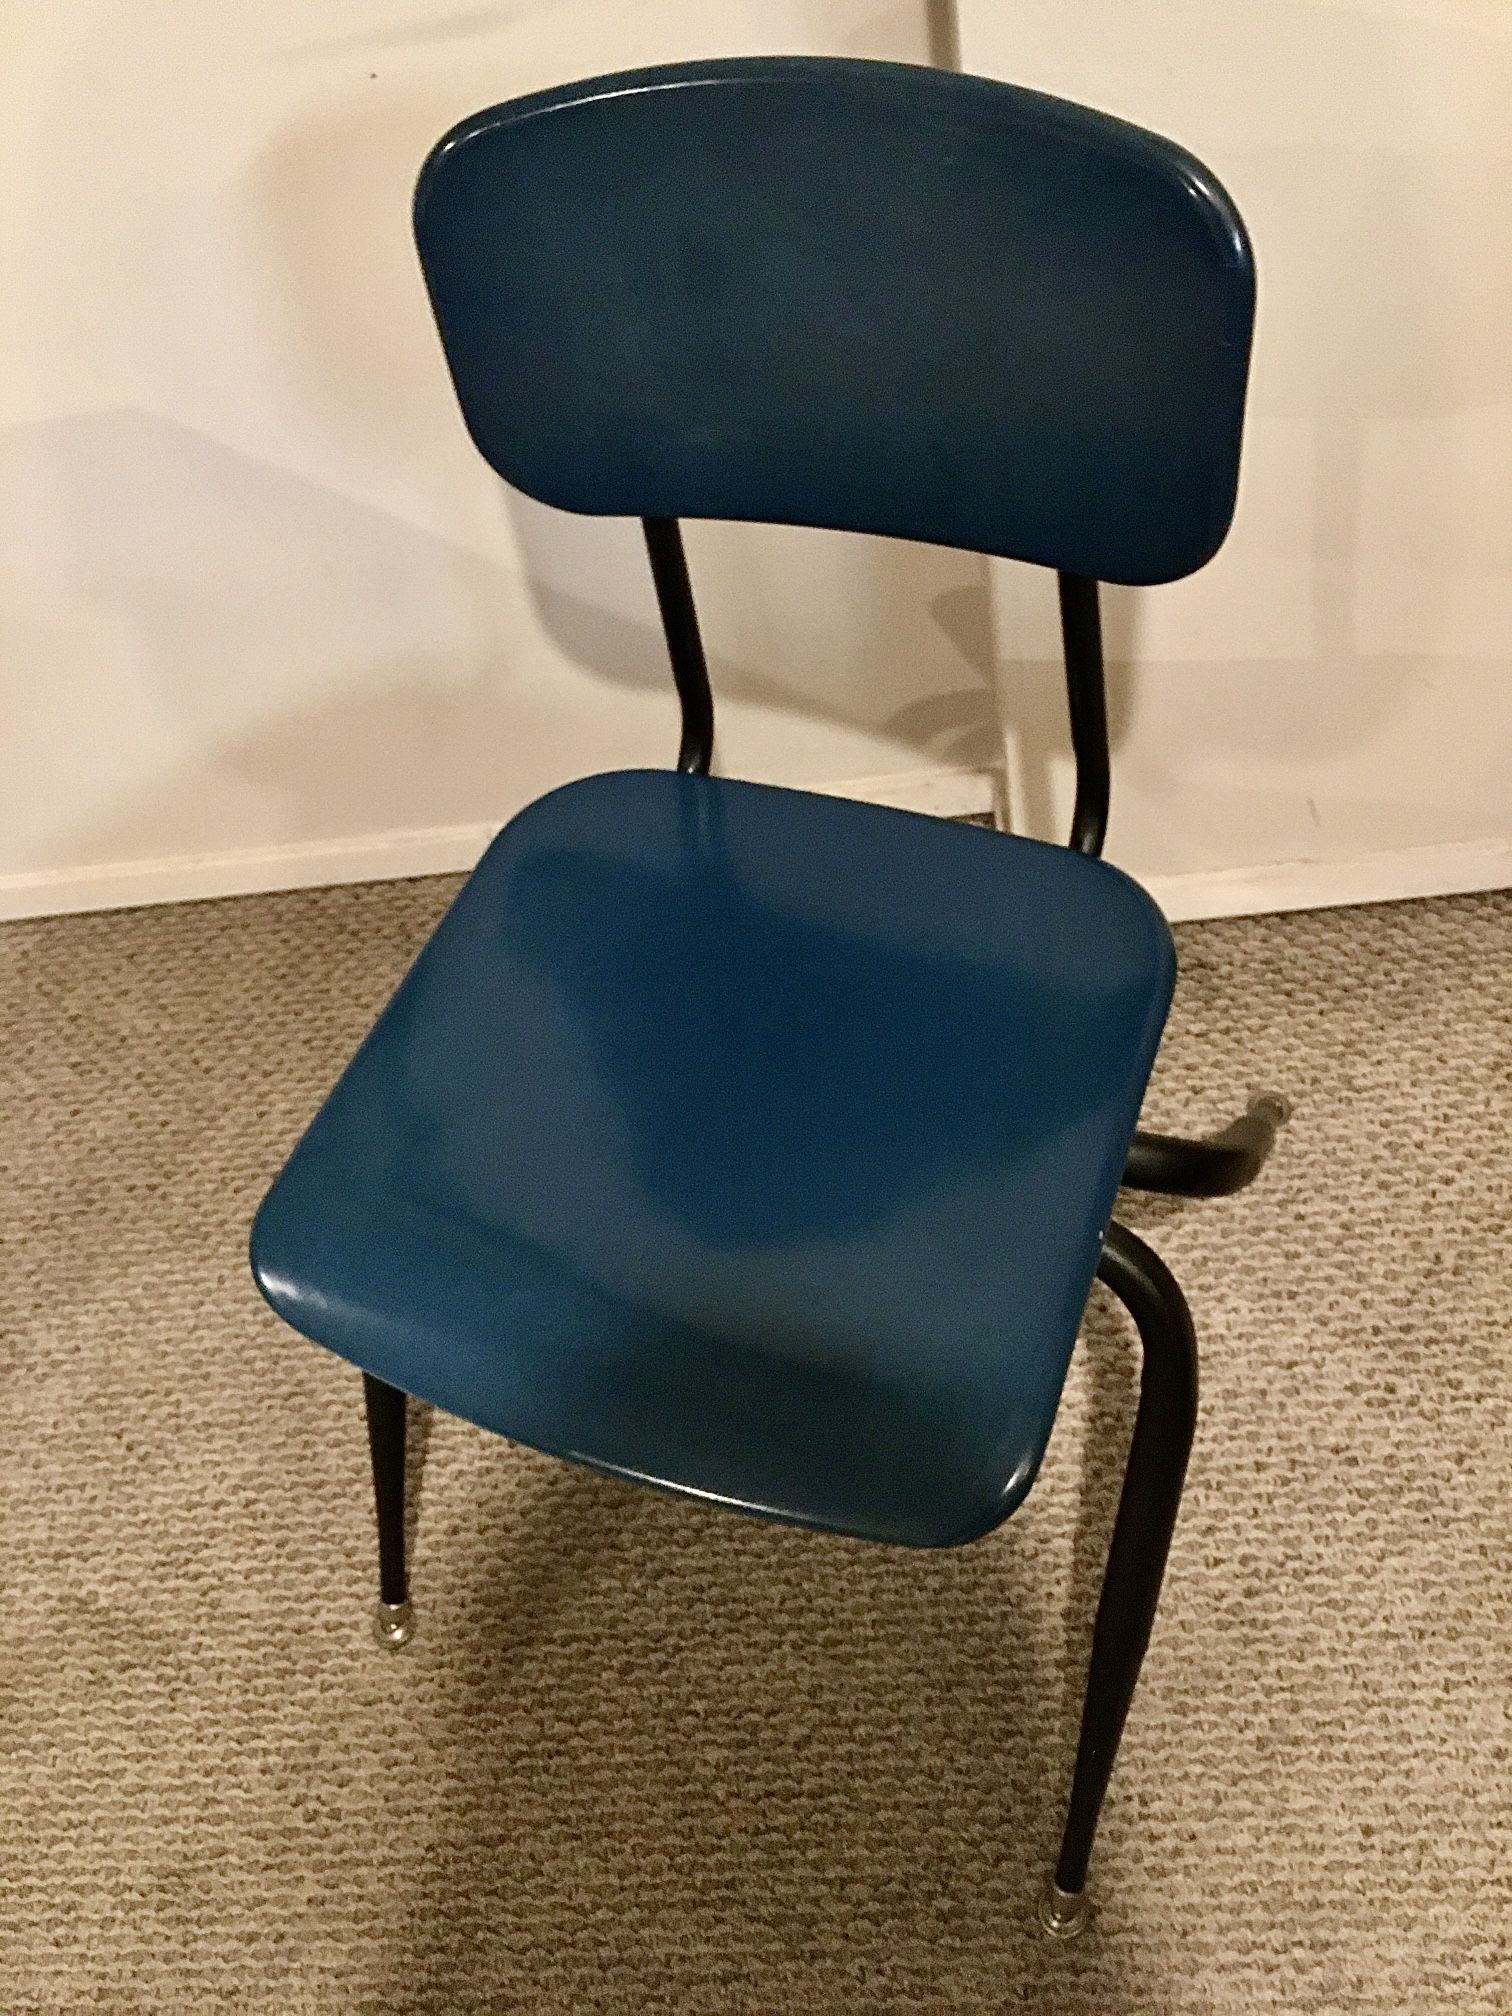 Vintage School Chairs Set Of 4 - Mint Condition